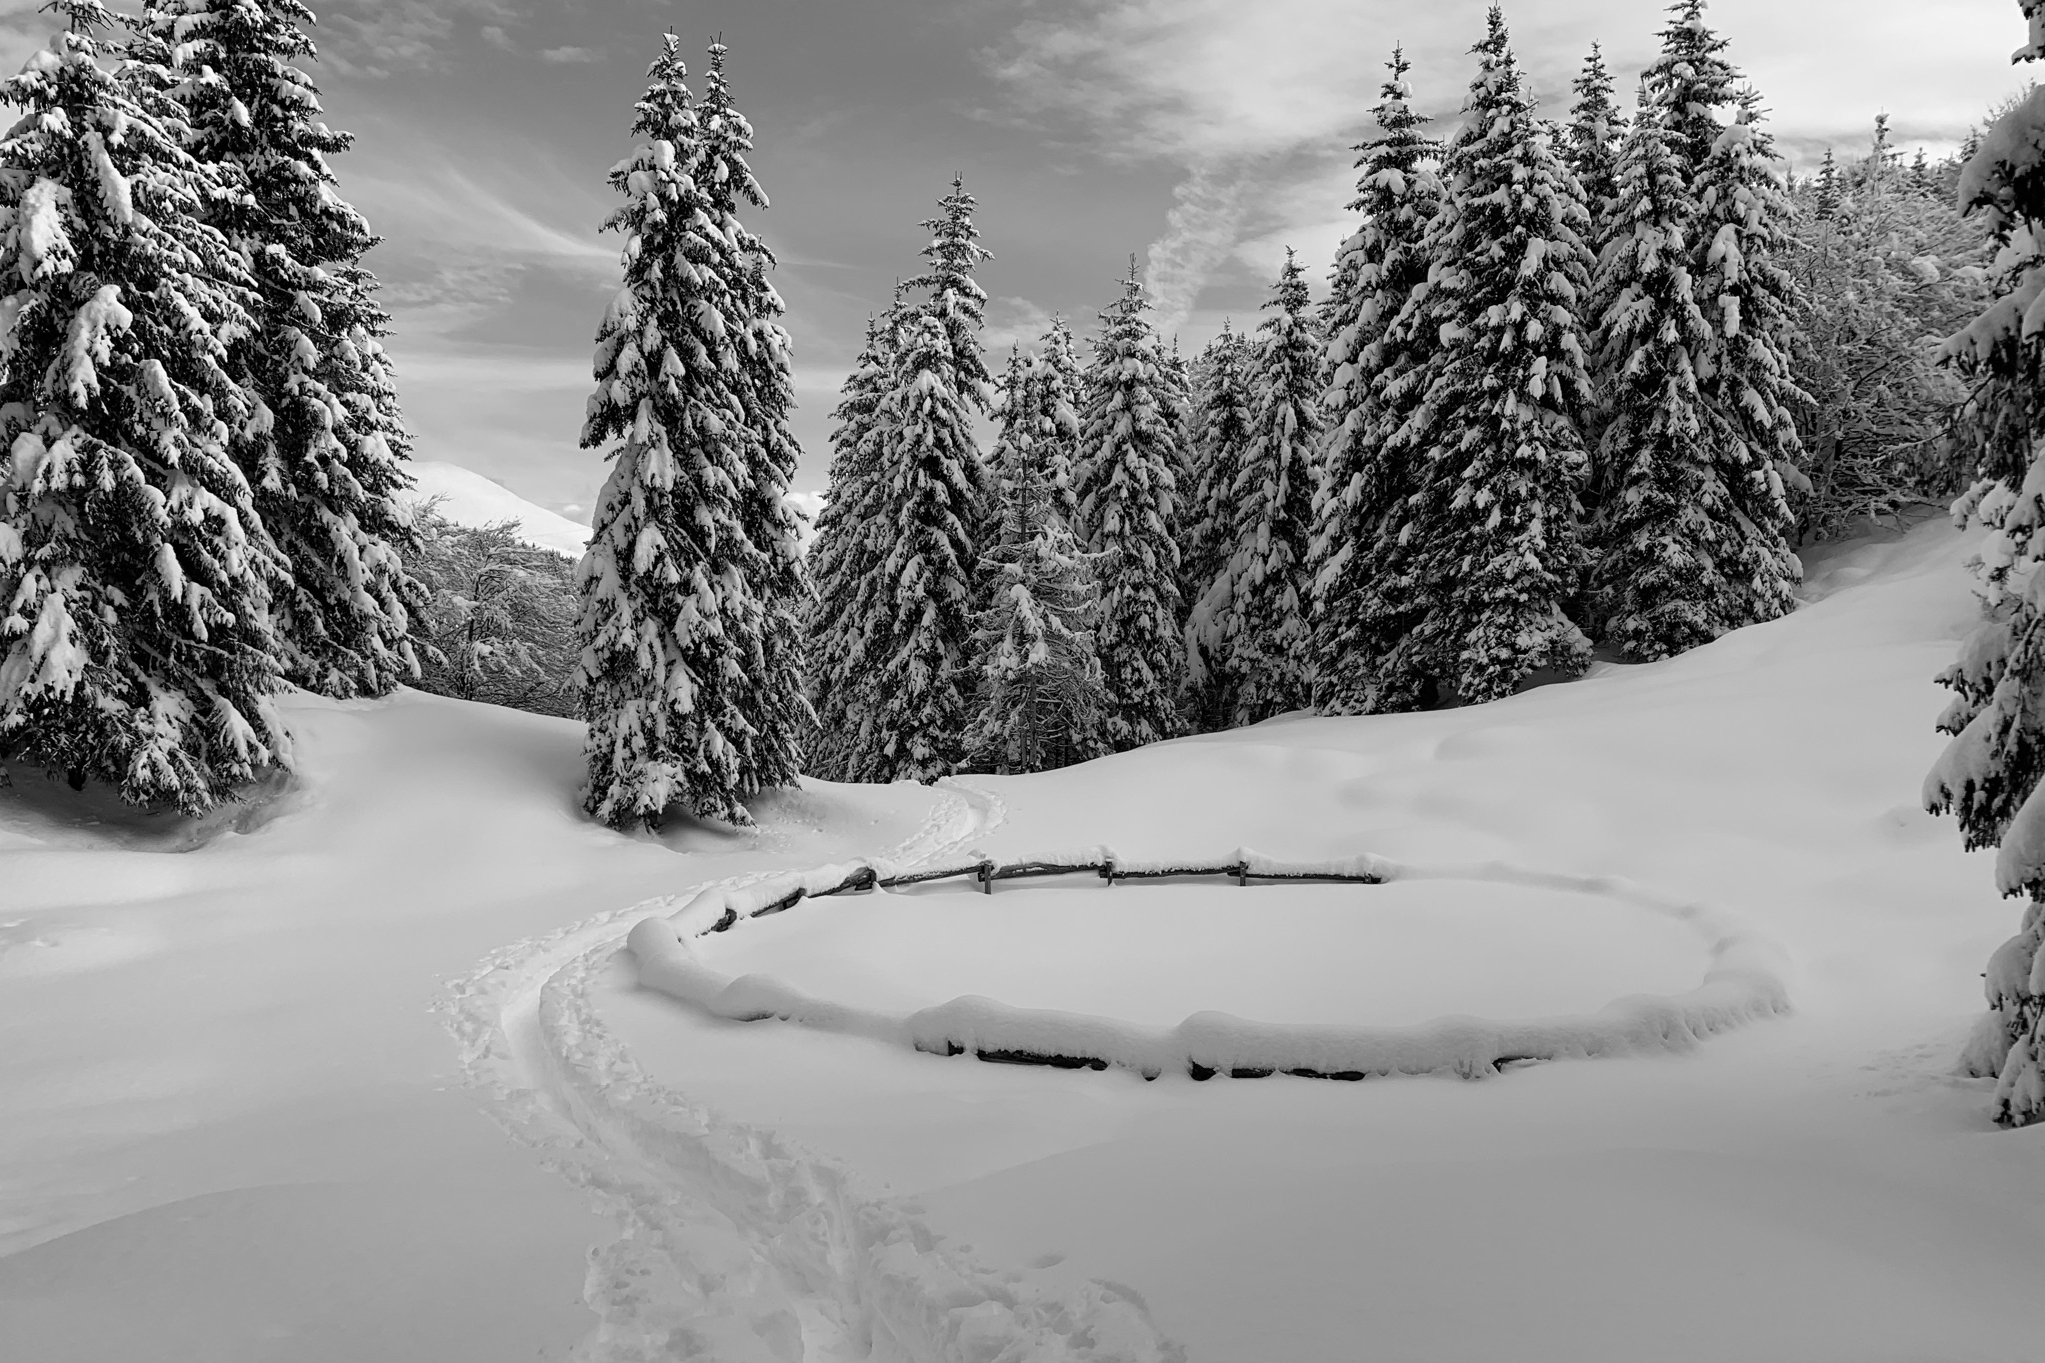 Circles in the snow...